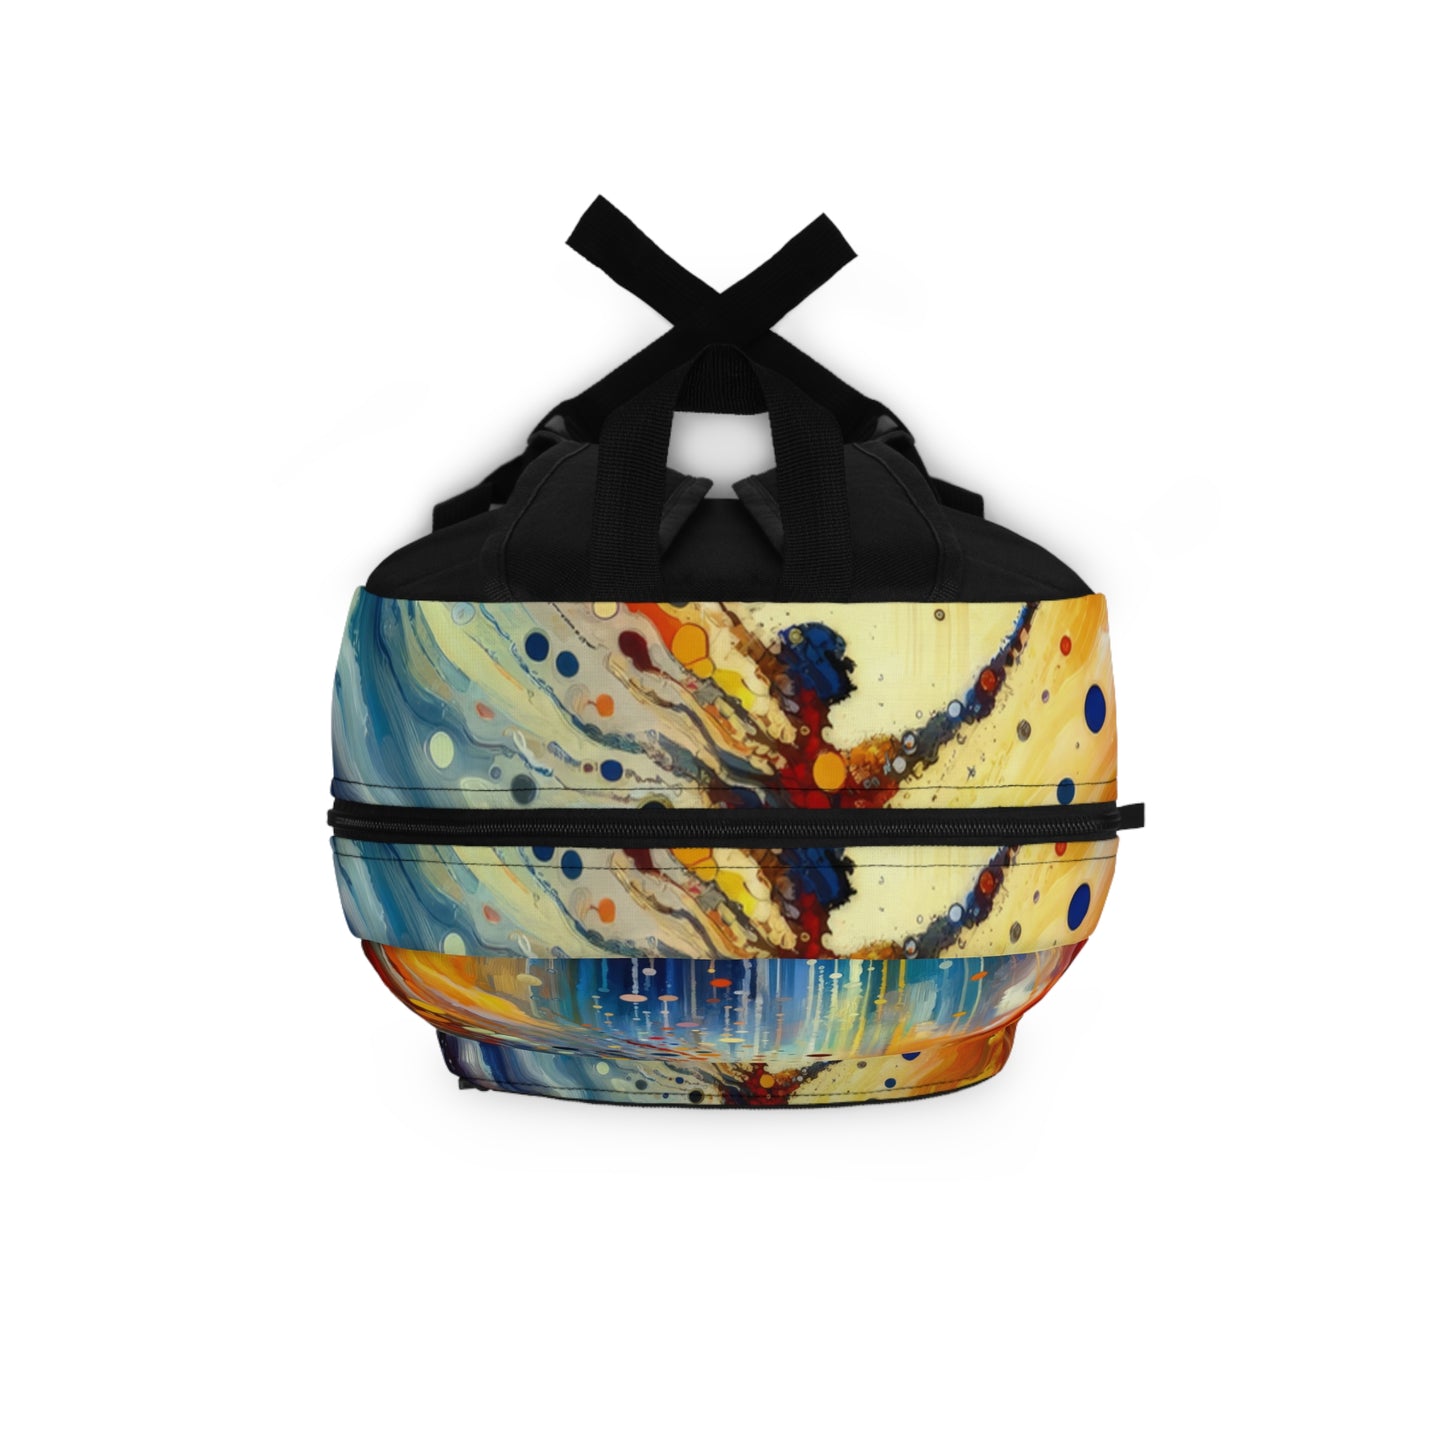 Vibrant Growth Symphony Backpack